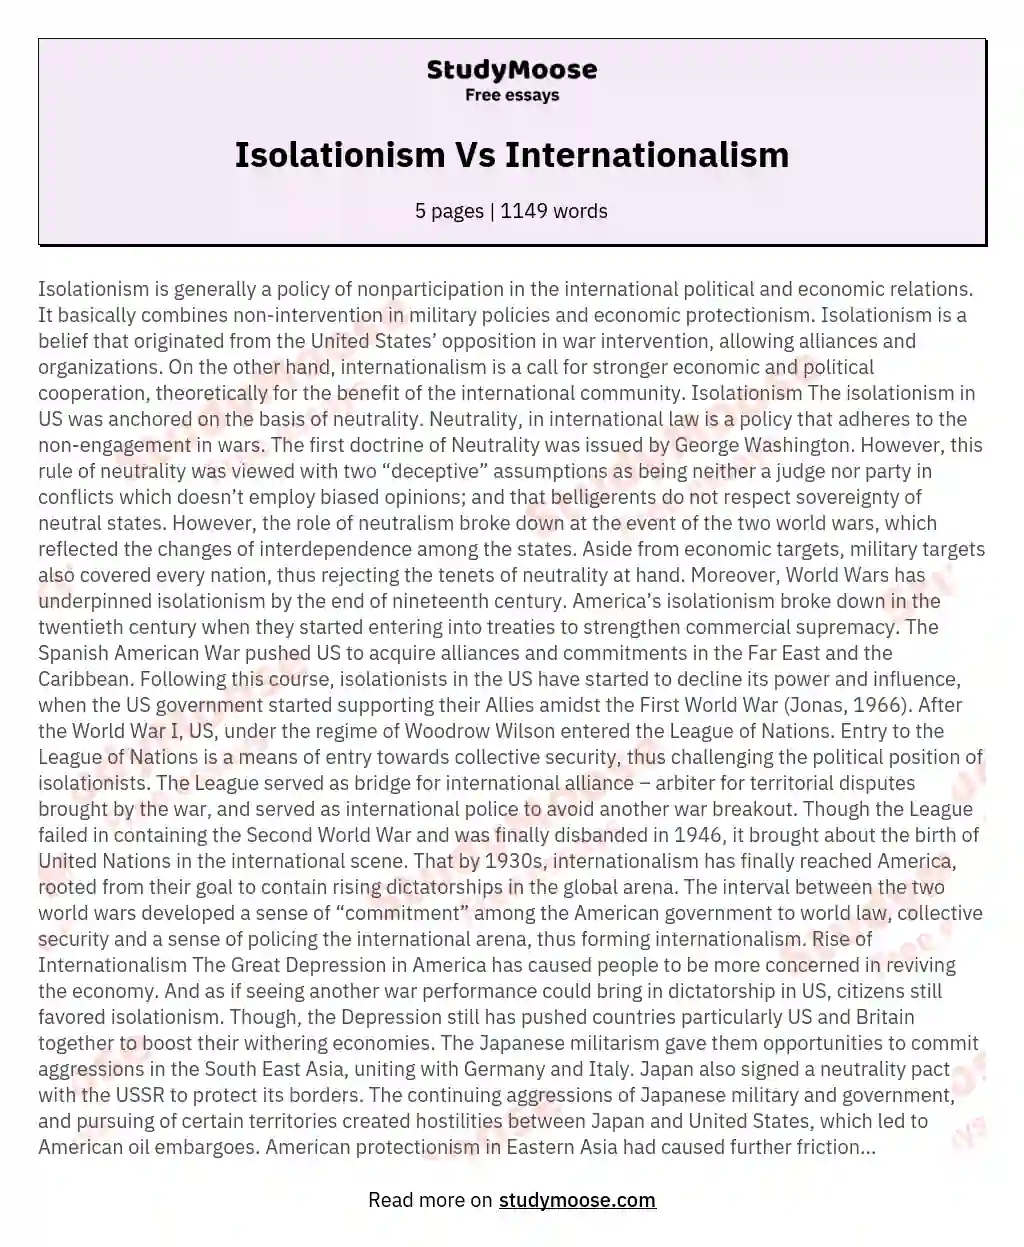 write an essay discussing internationalism and isolationism